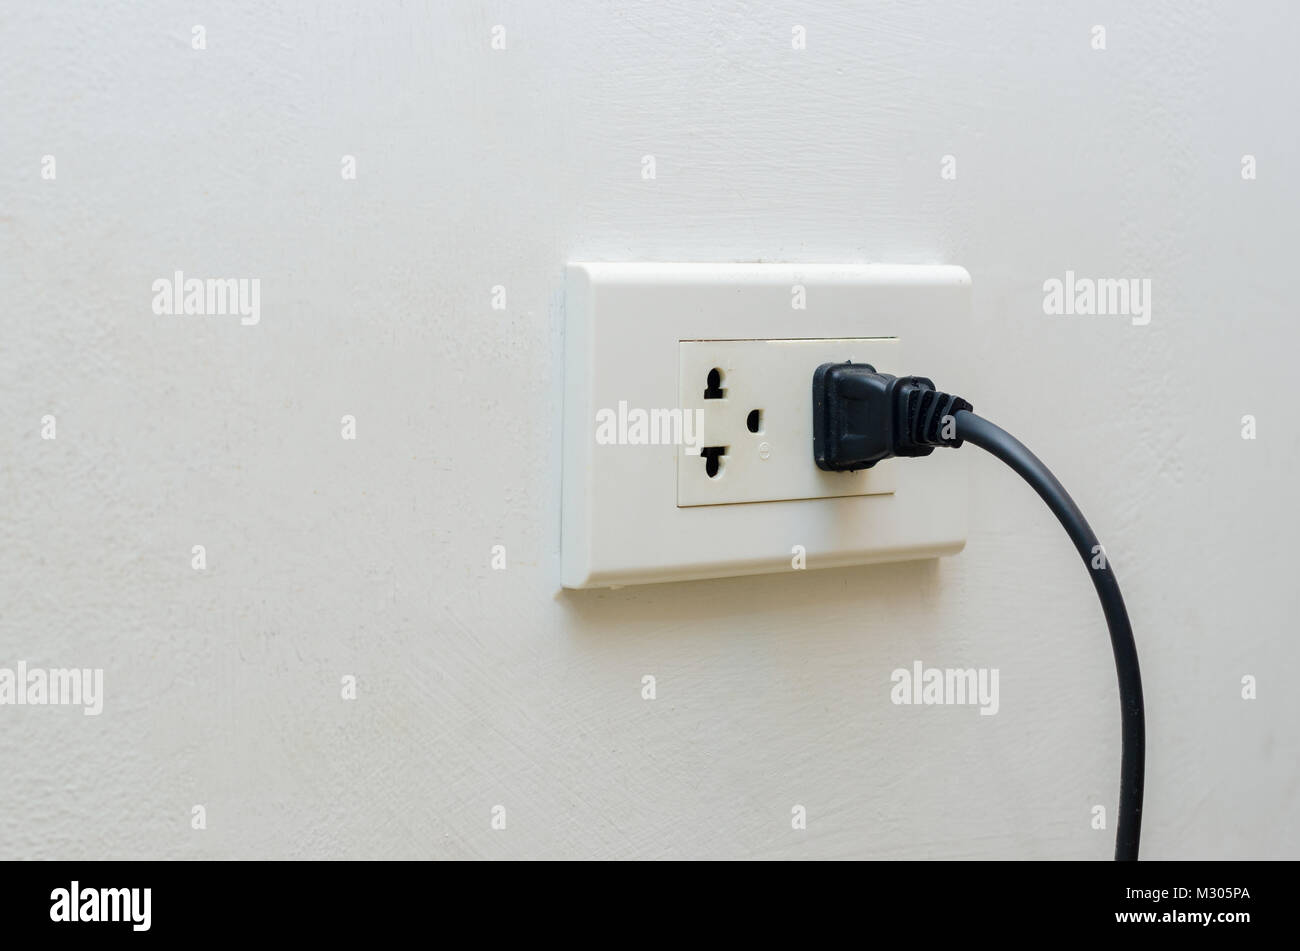 hand outlet Power saving Hand inserting electrical plug into outlet Stock Photo